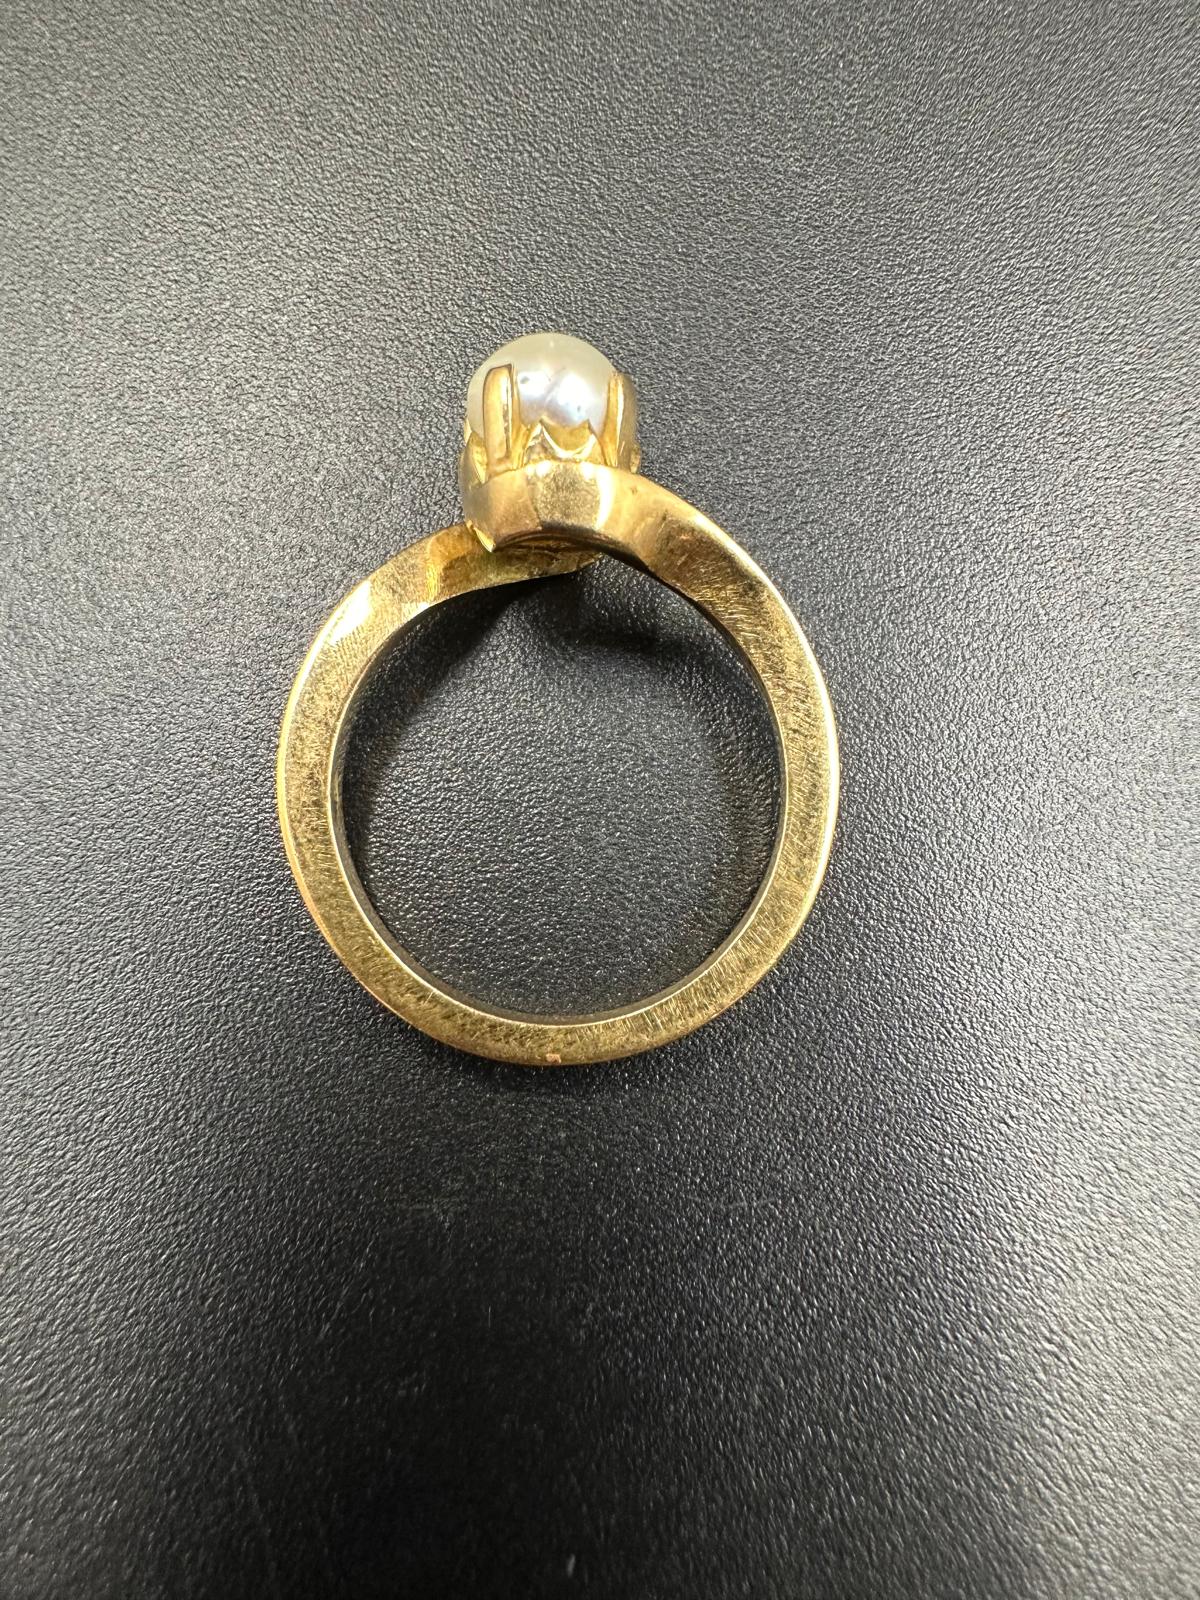 Three gold pearl rings with an approximate total weight of 11g. - Image 2 of 4